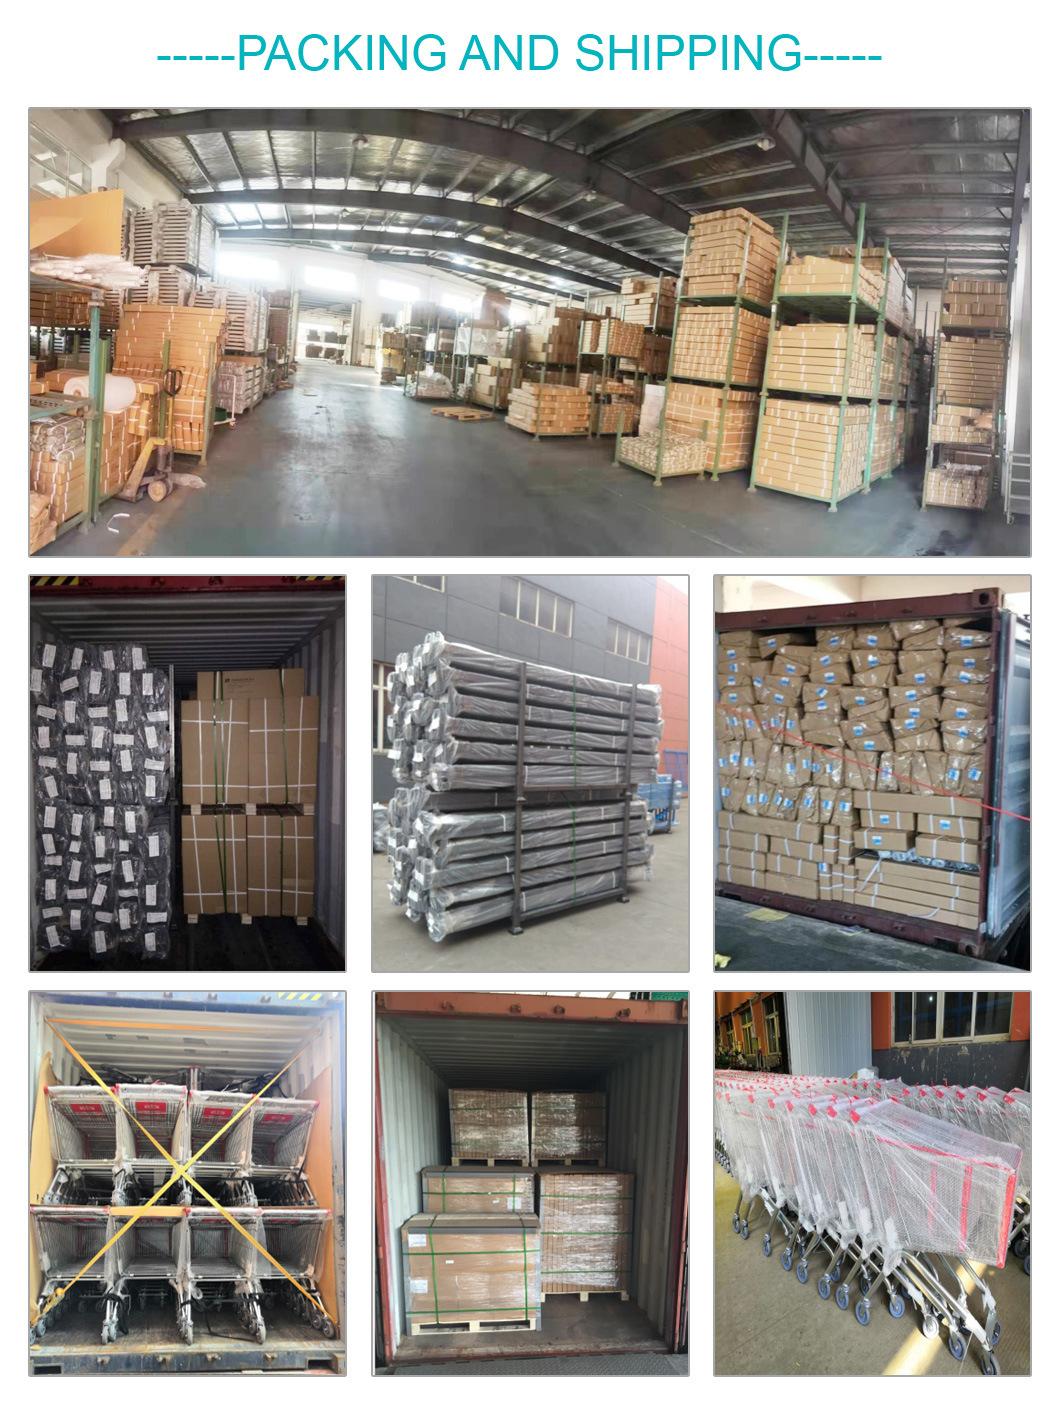 300L Metal Wire Mesh Container with Ce Certification